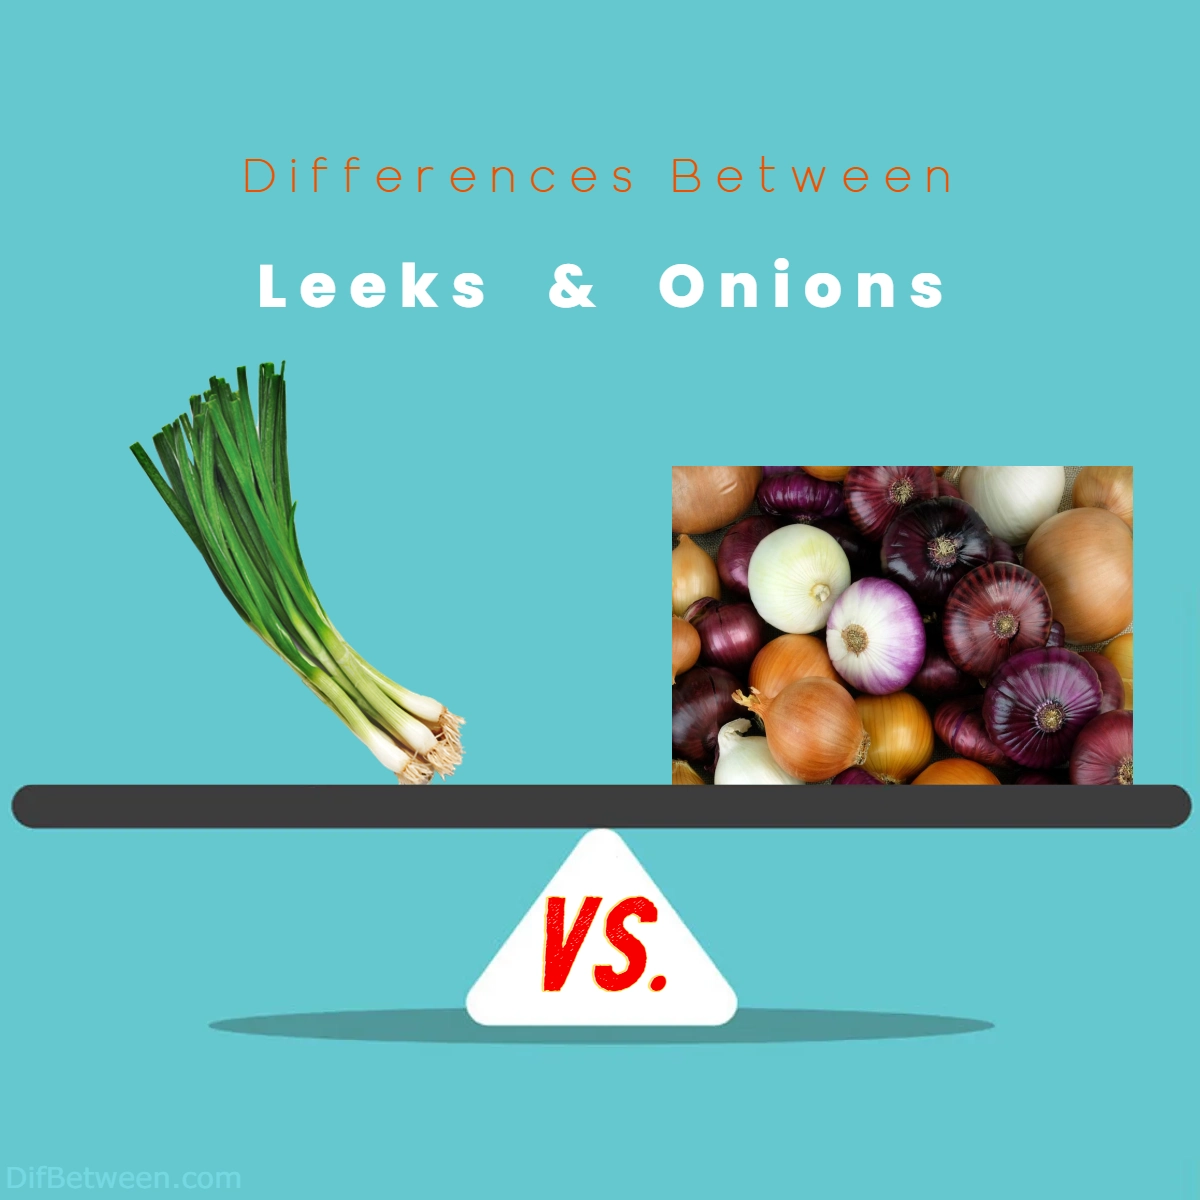 Difference Between Leeks and Onions